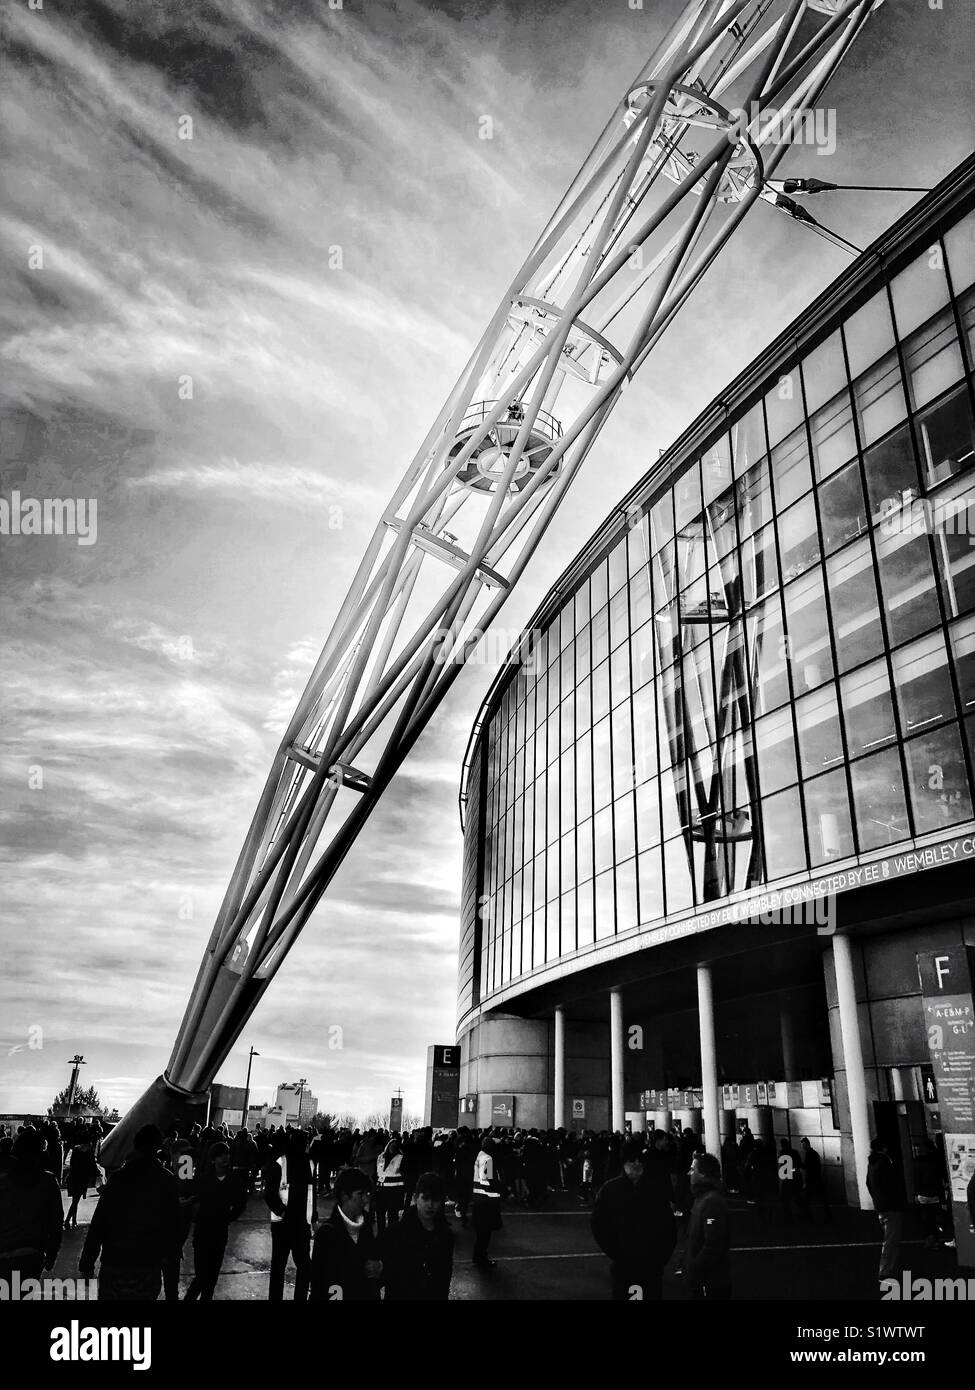 Detail of the arch at Wembley Stadium on a match day, London, England, UK. Stock Photo